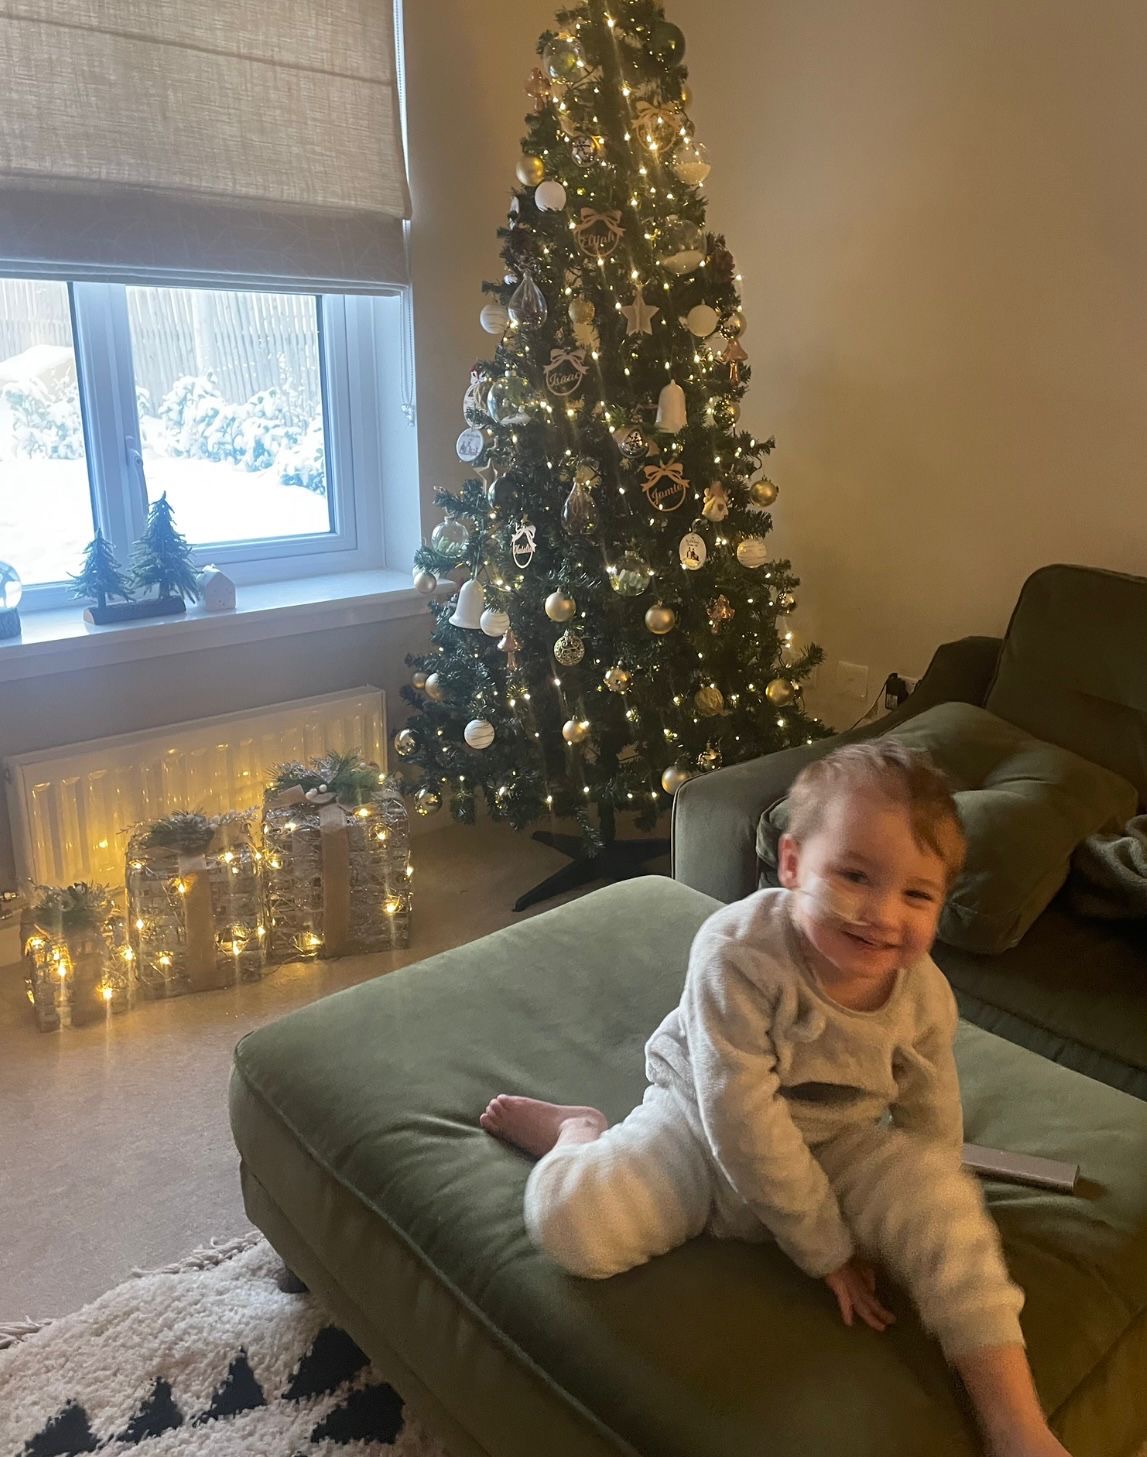 Elijah is home for Christmas after fighting deadly bug in hospital